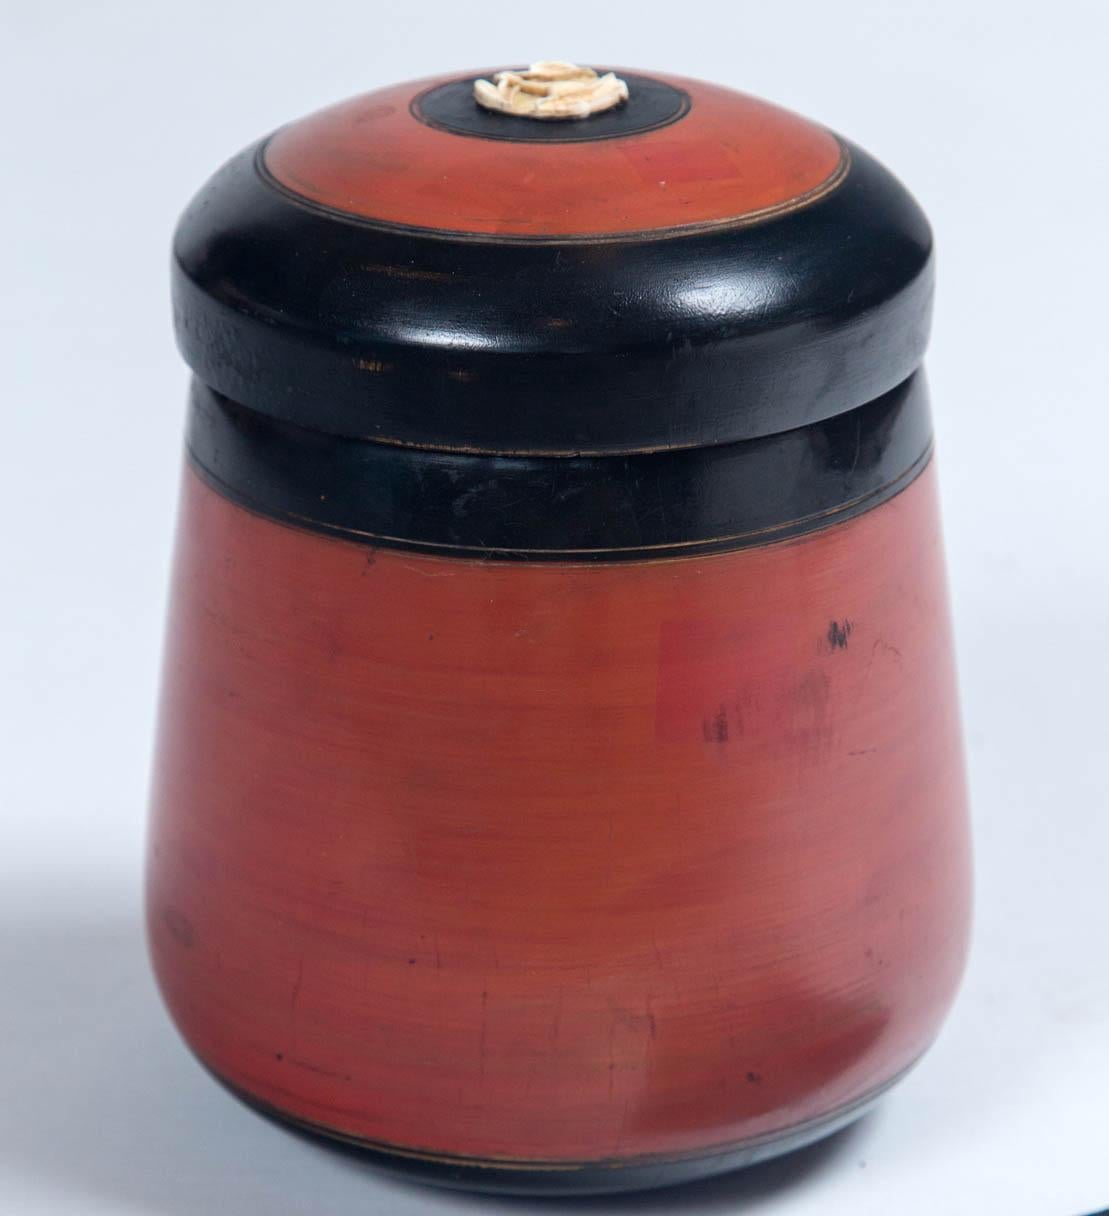 Vintage Asian lacquerware storage jar, 20th century. Hand-turned wood, cinnabar and black lacquer finish. Delicately carved floral inlay at center of lid.